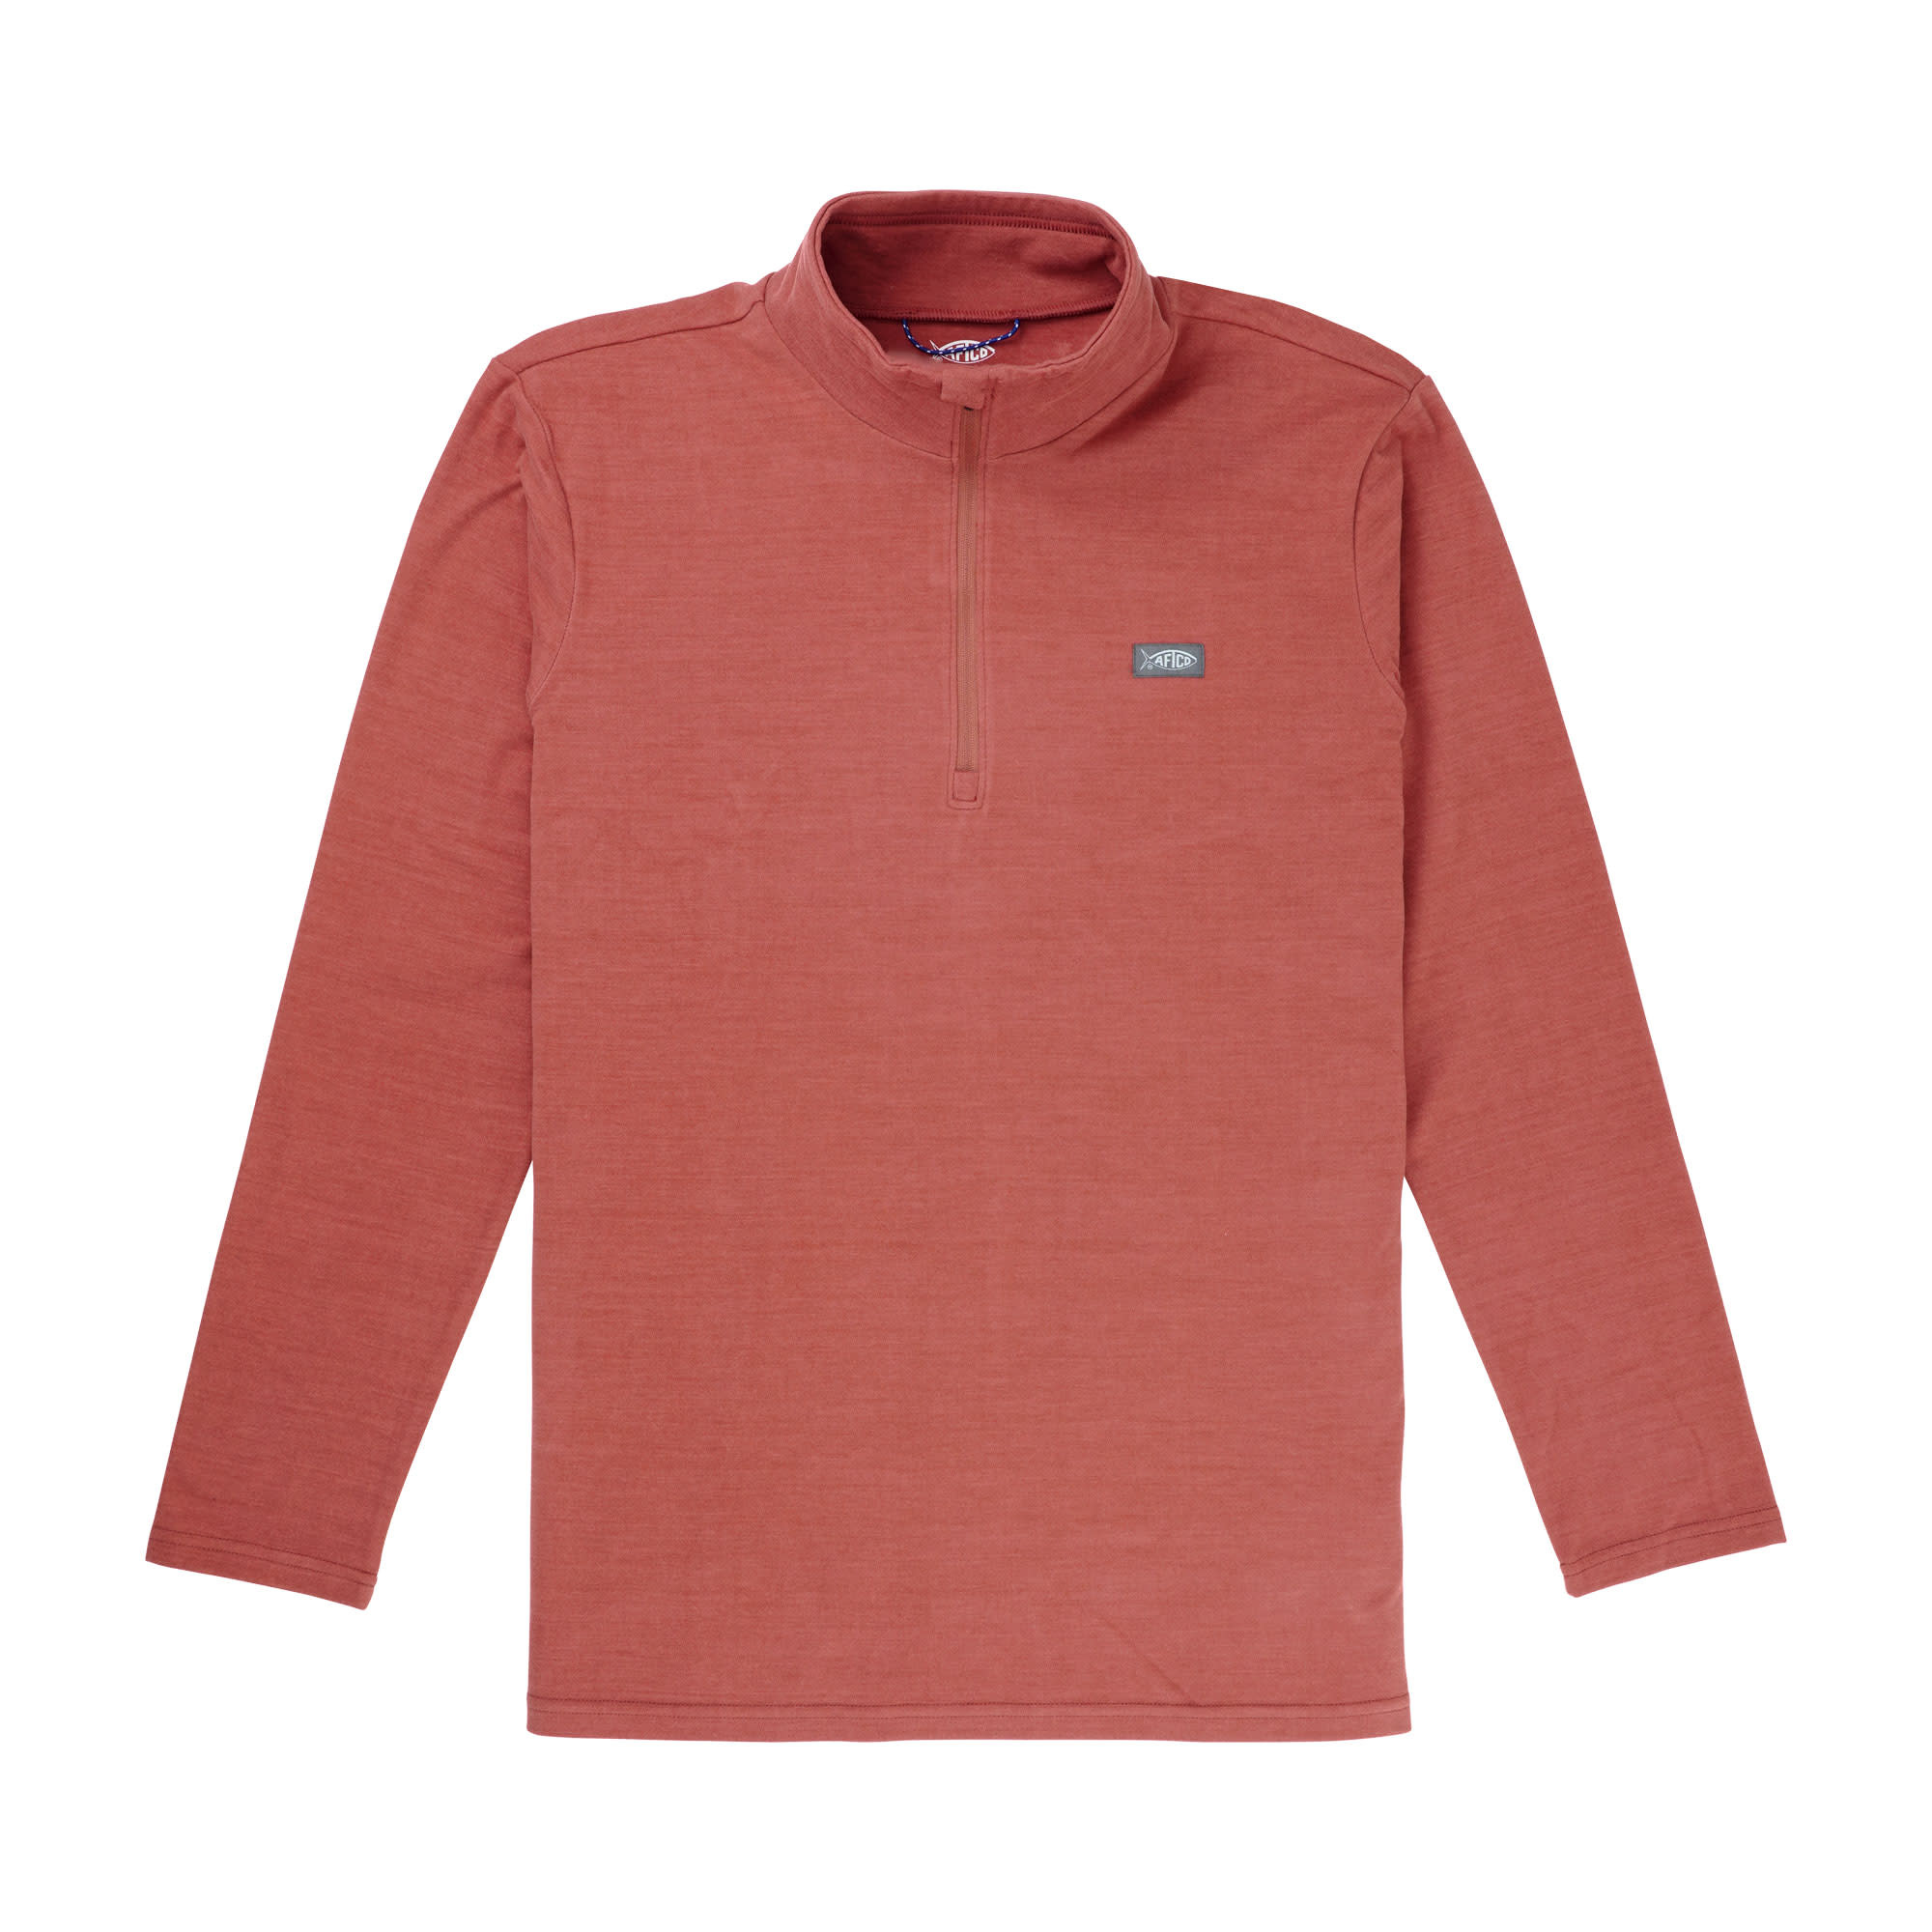 Aftco Men's Coastal Layer 1/4 Zip Jacket - EZN Outfitters